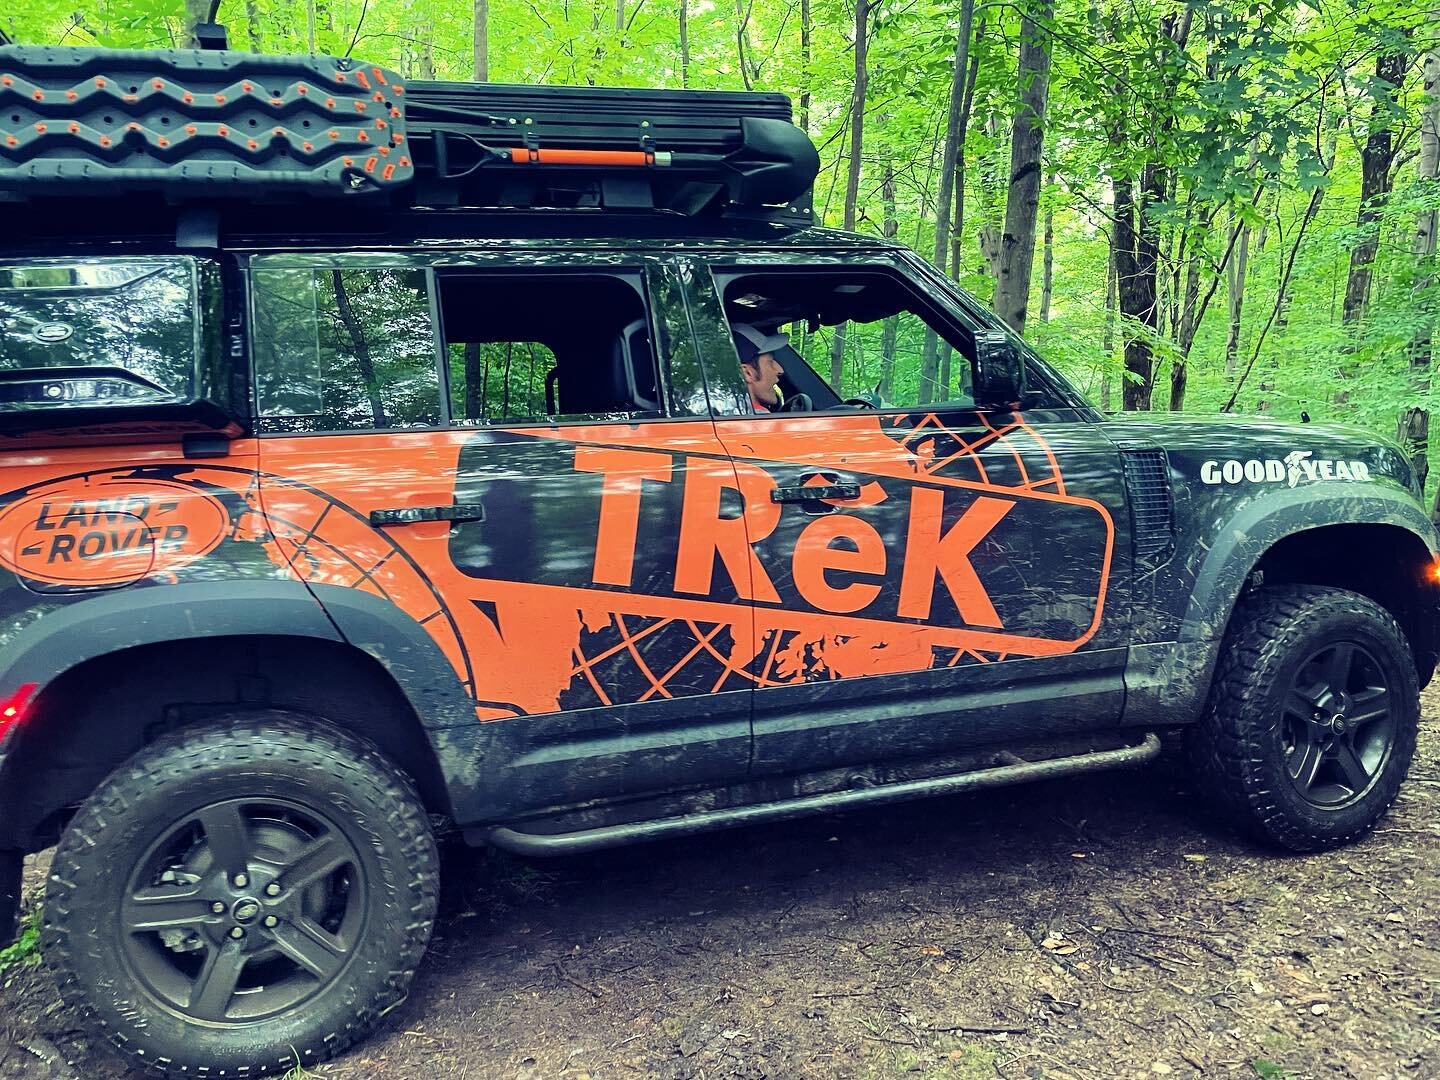 Today we had the first trial group run through the TRēK program that starts in a couple of days. I hope everyone had fun, thank you to you all for the feedback that makes these programs even better!
@landroverusa @sea2sum @wboffroadtheworld @ramboben